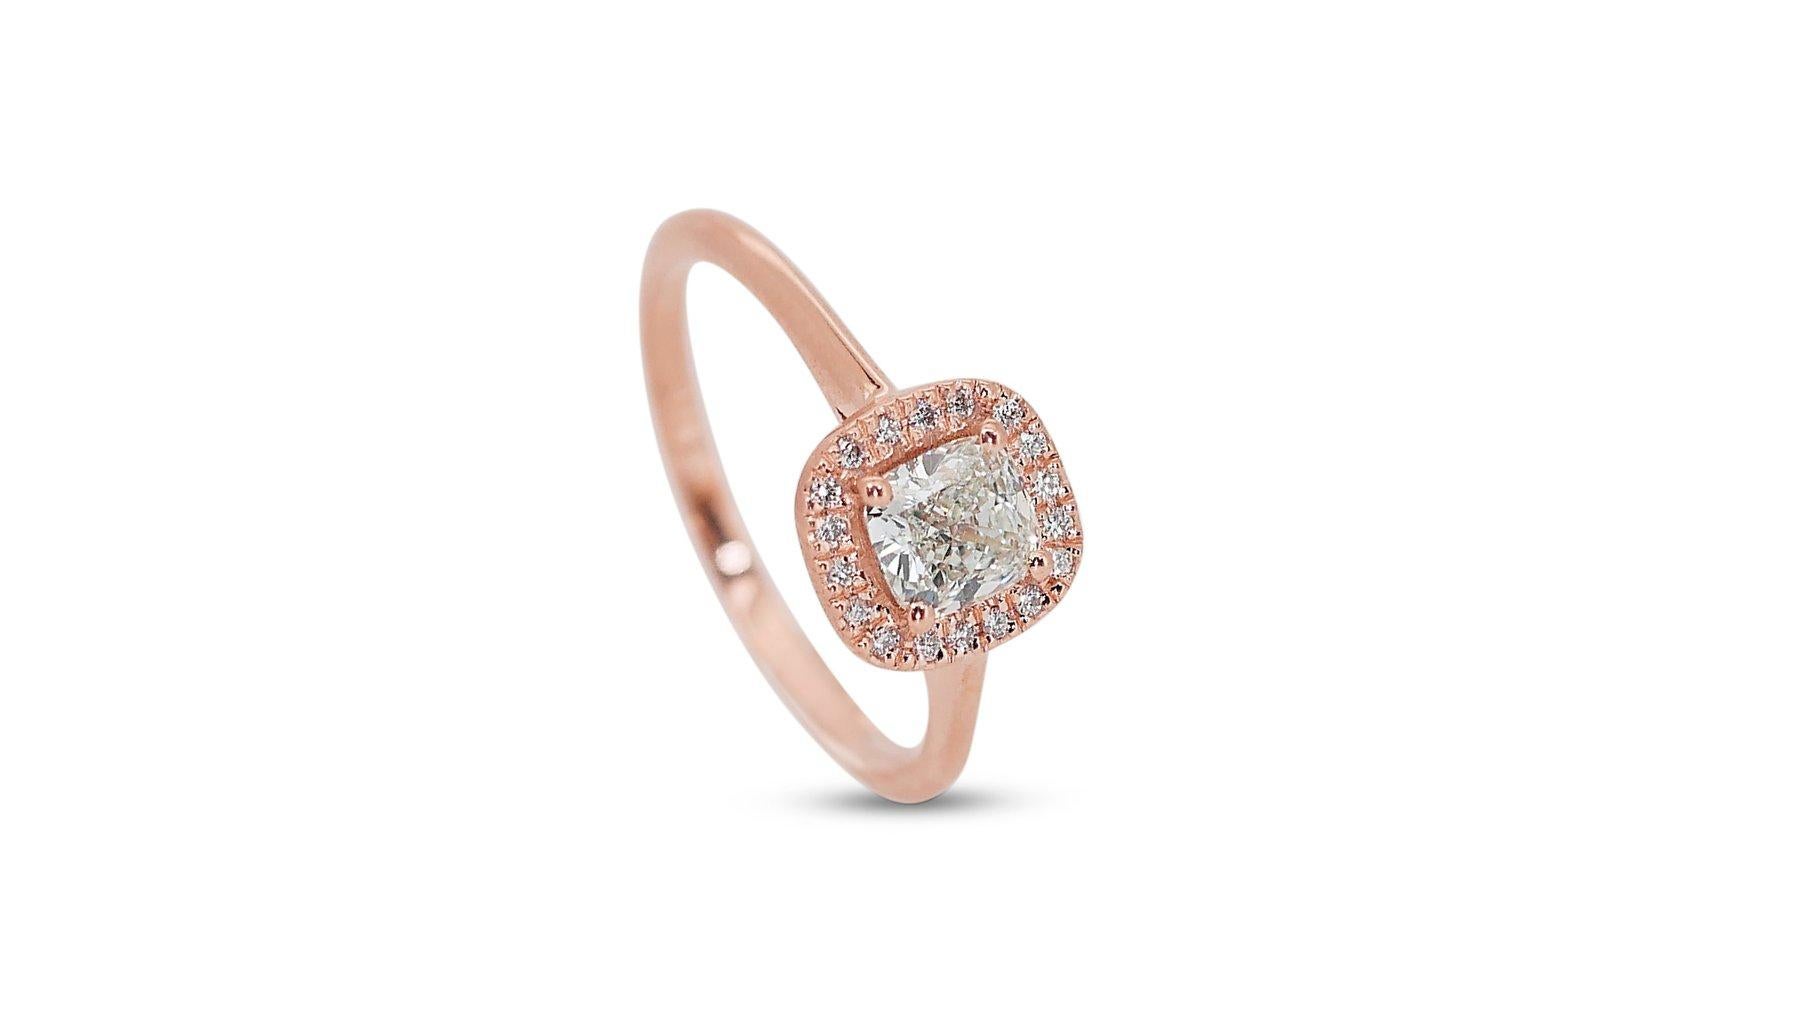 Gorgeous 1.60ct Diamonds Halo Ring in 18k Rose Gold - GIA Certified

Discover a masterpiece of craftsmanship and style with this exquisite 18k rose gold halo ring, featuring a breathtaking 1.50-carat cushion-cut diamond. This main stone is elegantly